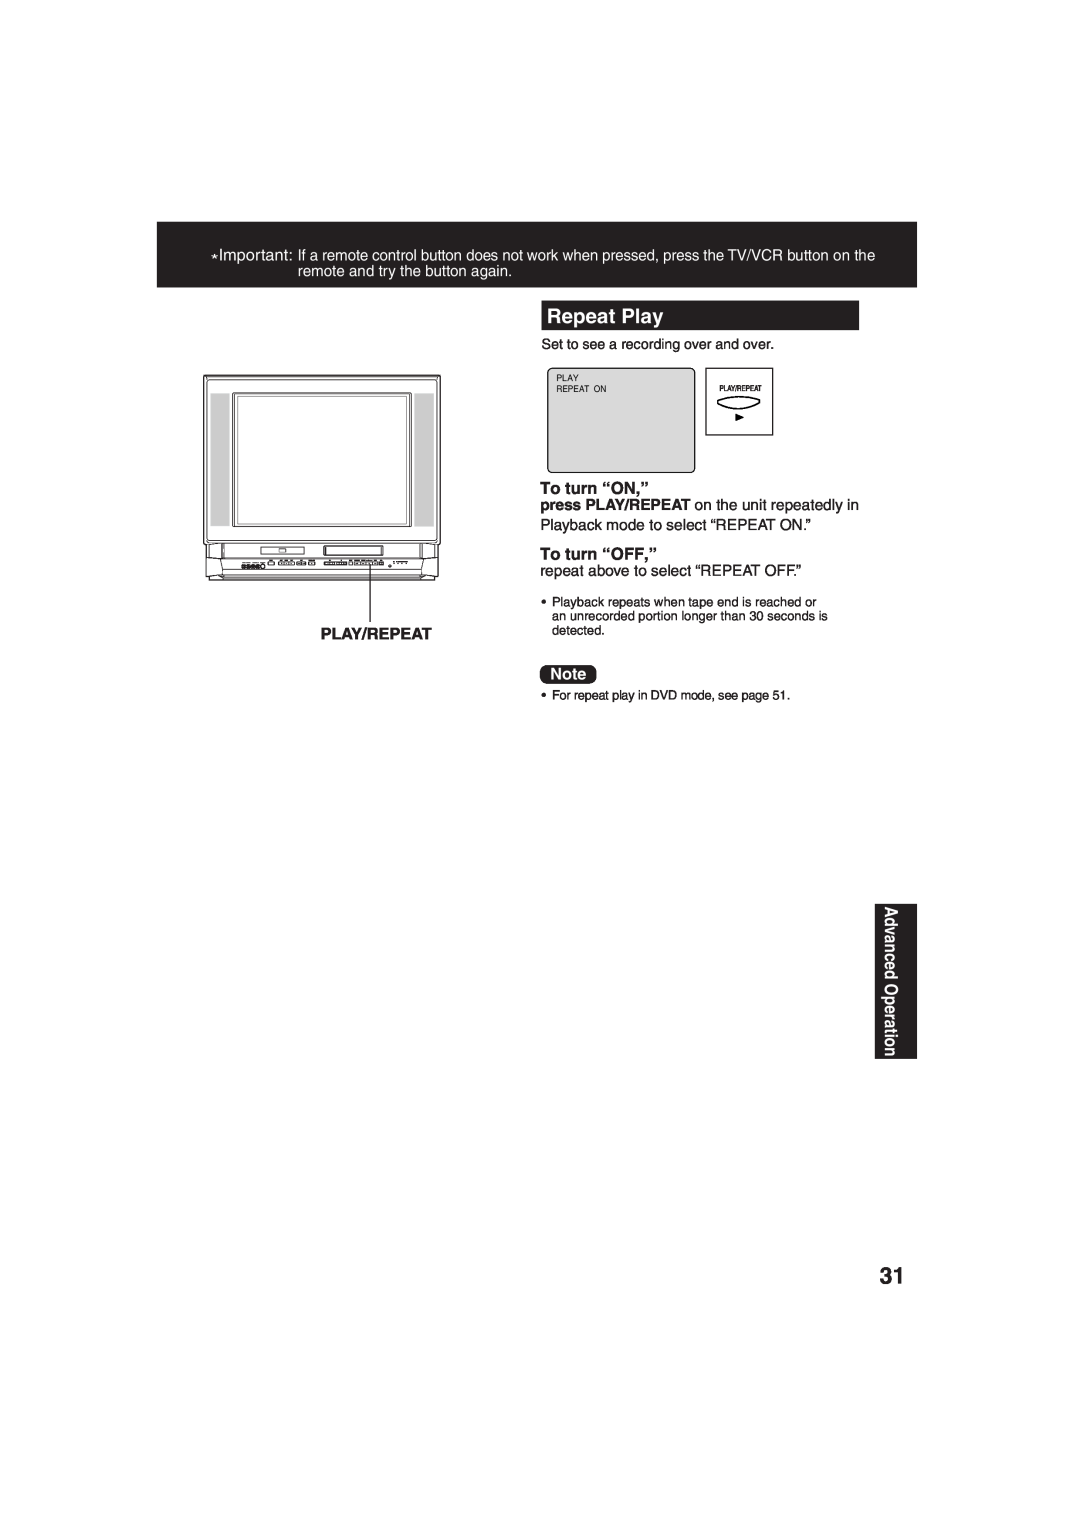 Panasonic PV-DF273, PV-DF203 manual Repeat Play, To turn “ON,”, To turn “OFF,”, PLAY/REPEATdetected, Advanced Operation 